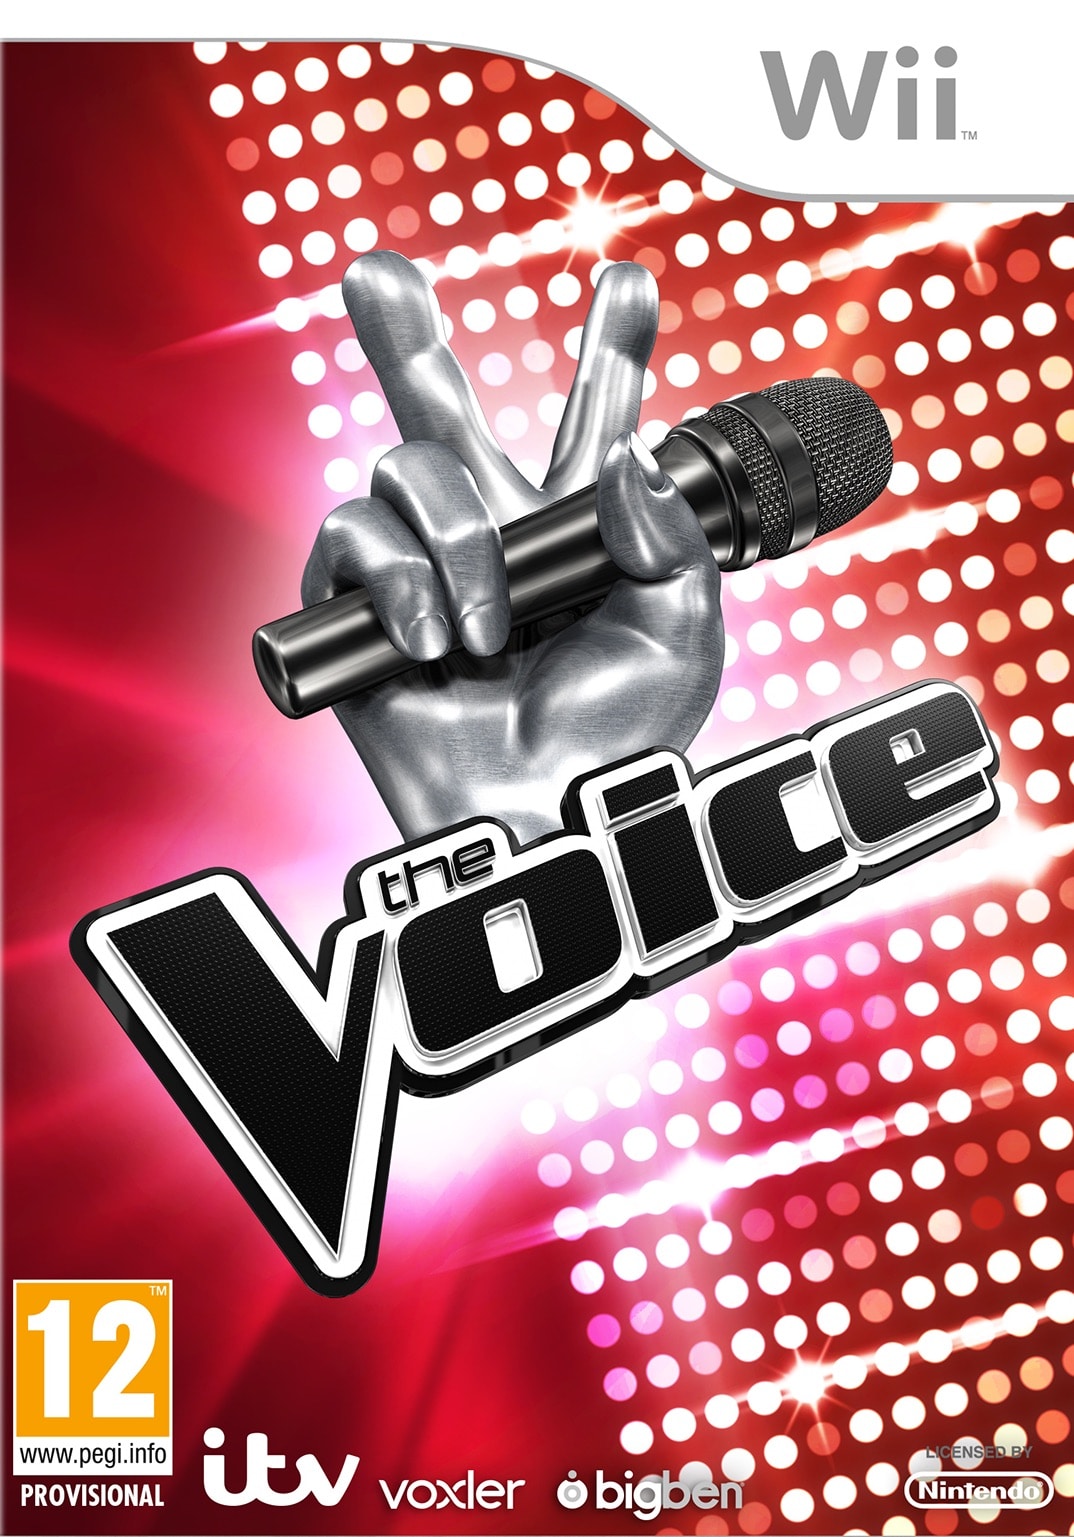 the-voice-wii-pack-shot